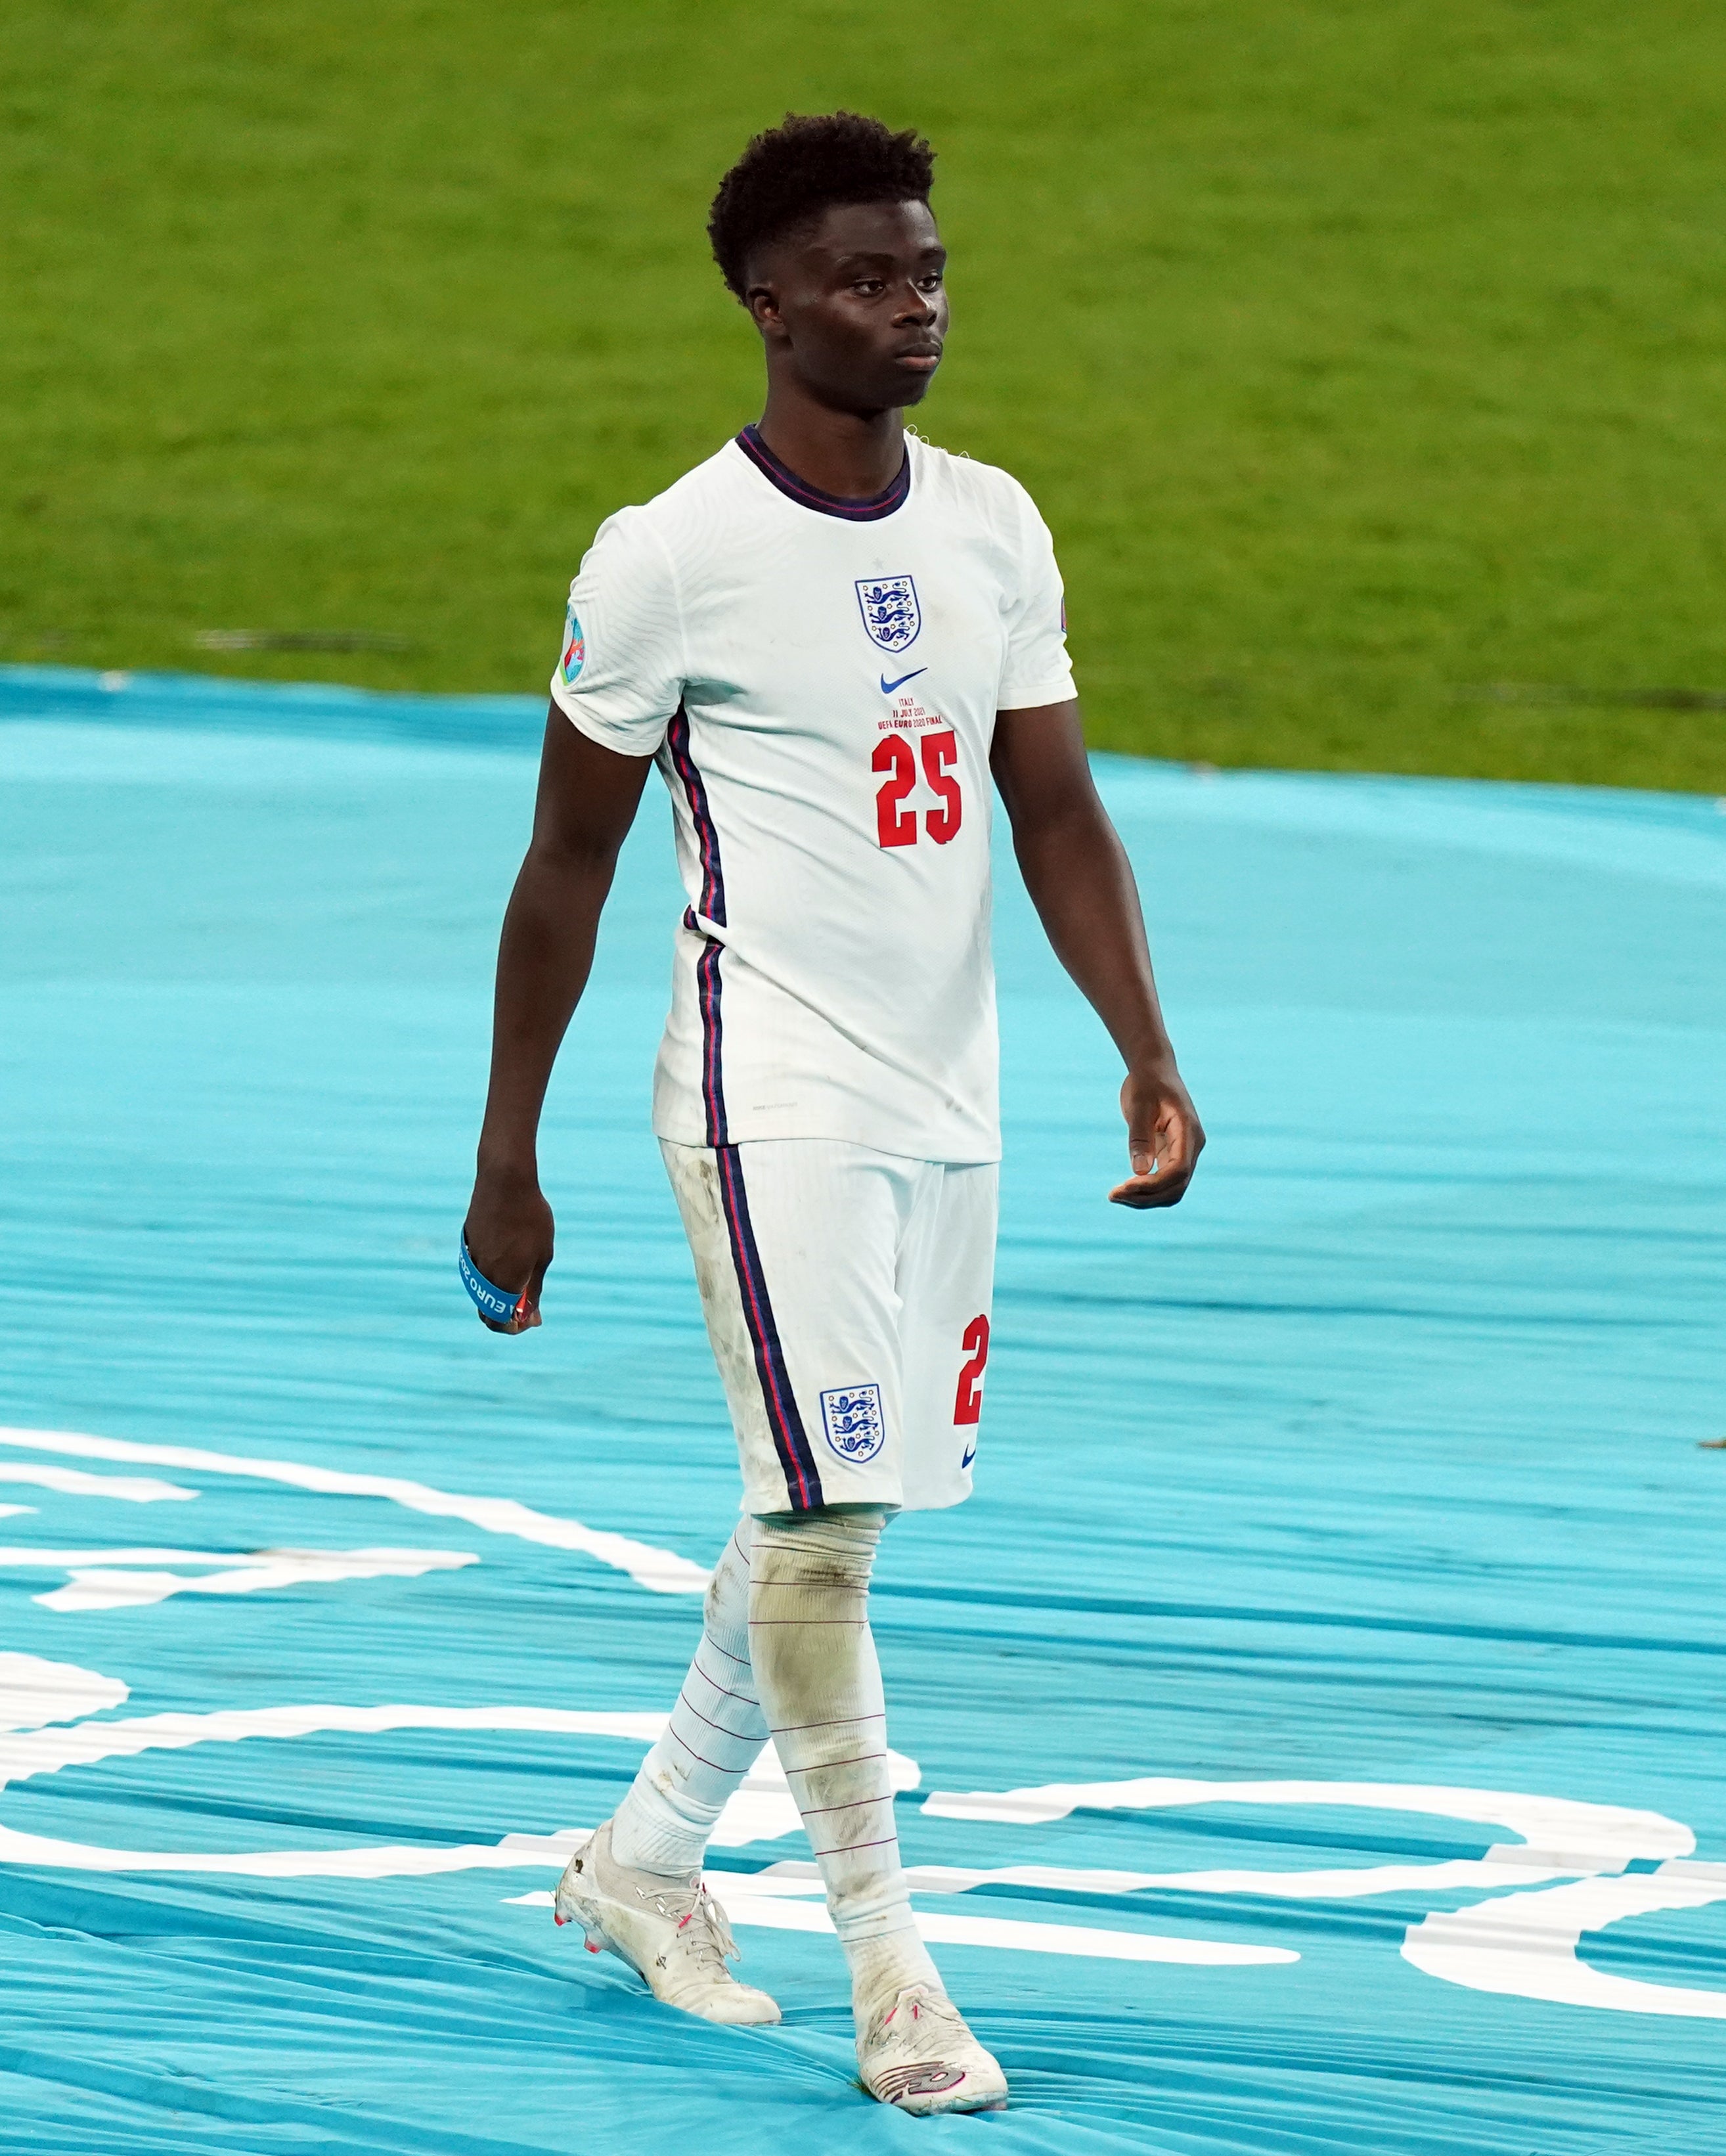 Bukayo Saka, pictured, cuts a dejected figure after missing a penalty in the Euro 2020 final (Mike Egerton/PA)